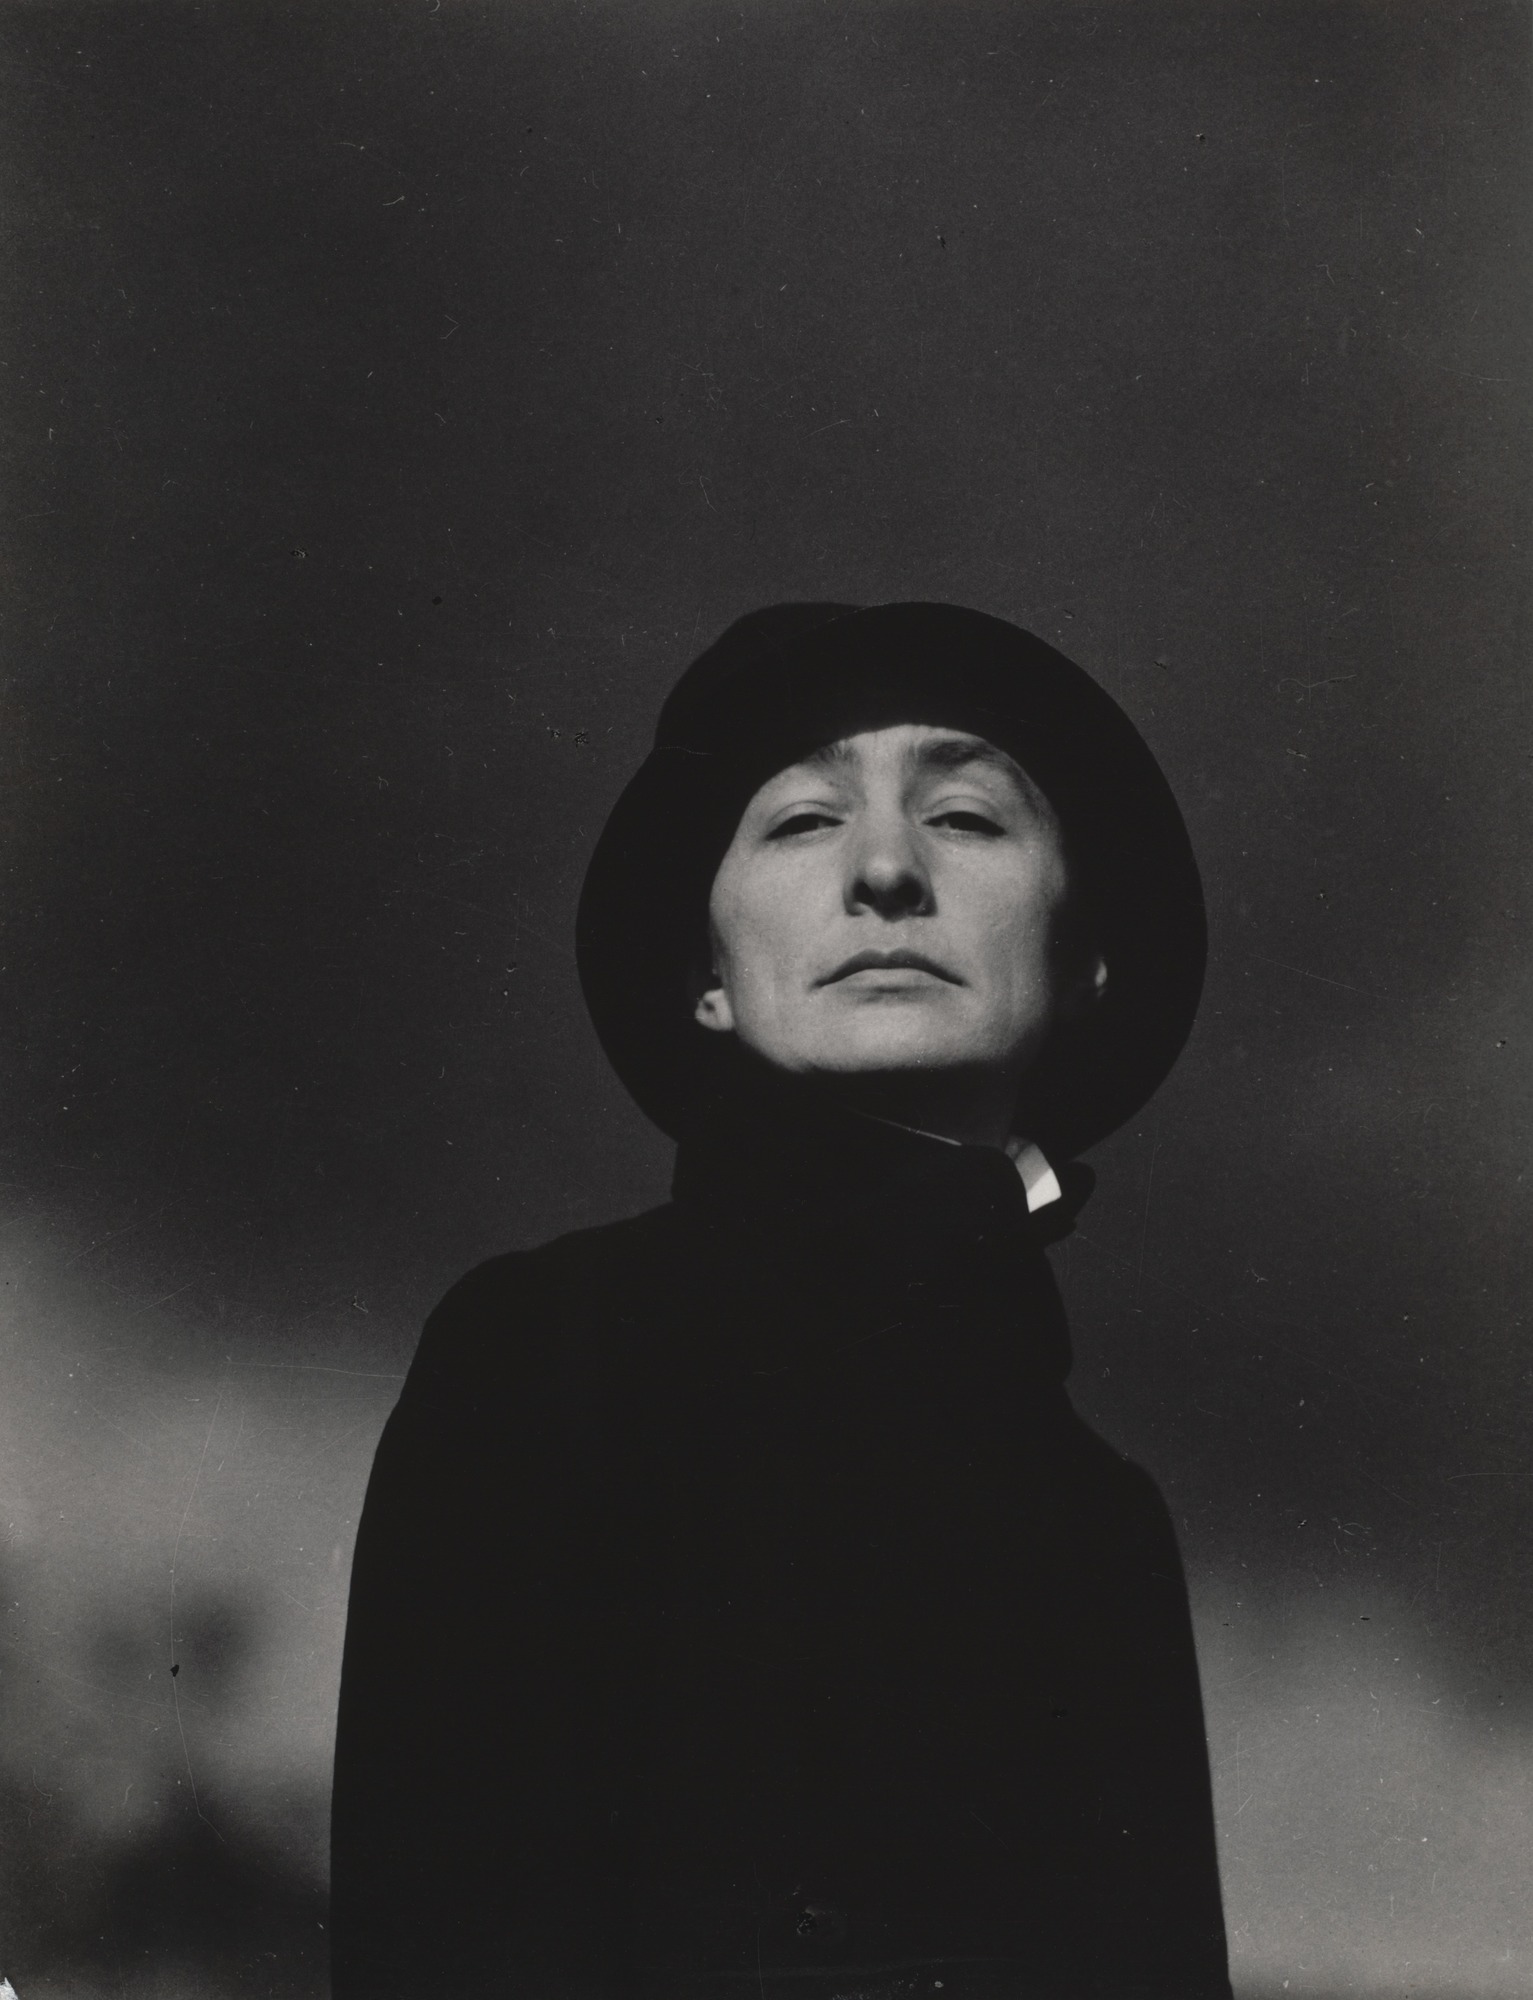 Black and white photograph of the artist Georgia O'Keeffe by Alfred Stieglitz. The photograph is taken from below, so that O'Keeffe is looking slightly down at the camera/viewer. She is wearing an all-black garment that covers her neck and arms completely. She also wears a small black hat that creates a circle around her face. She is not smiling.